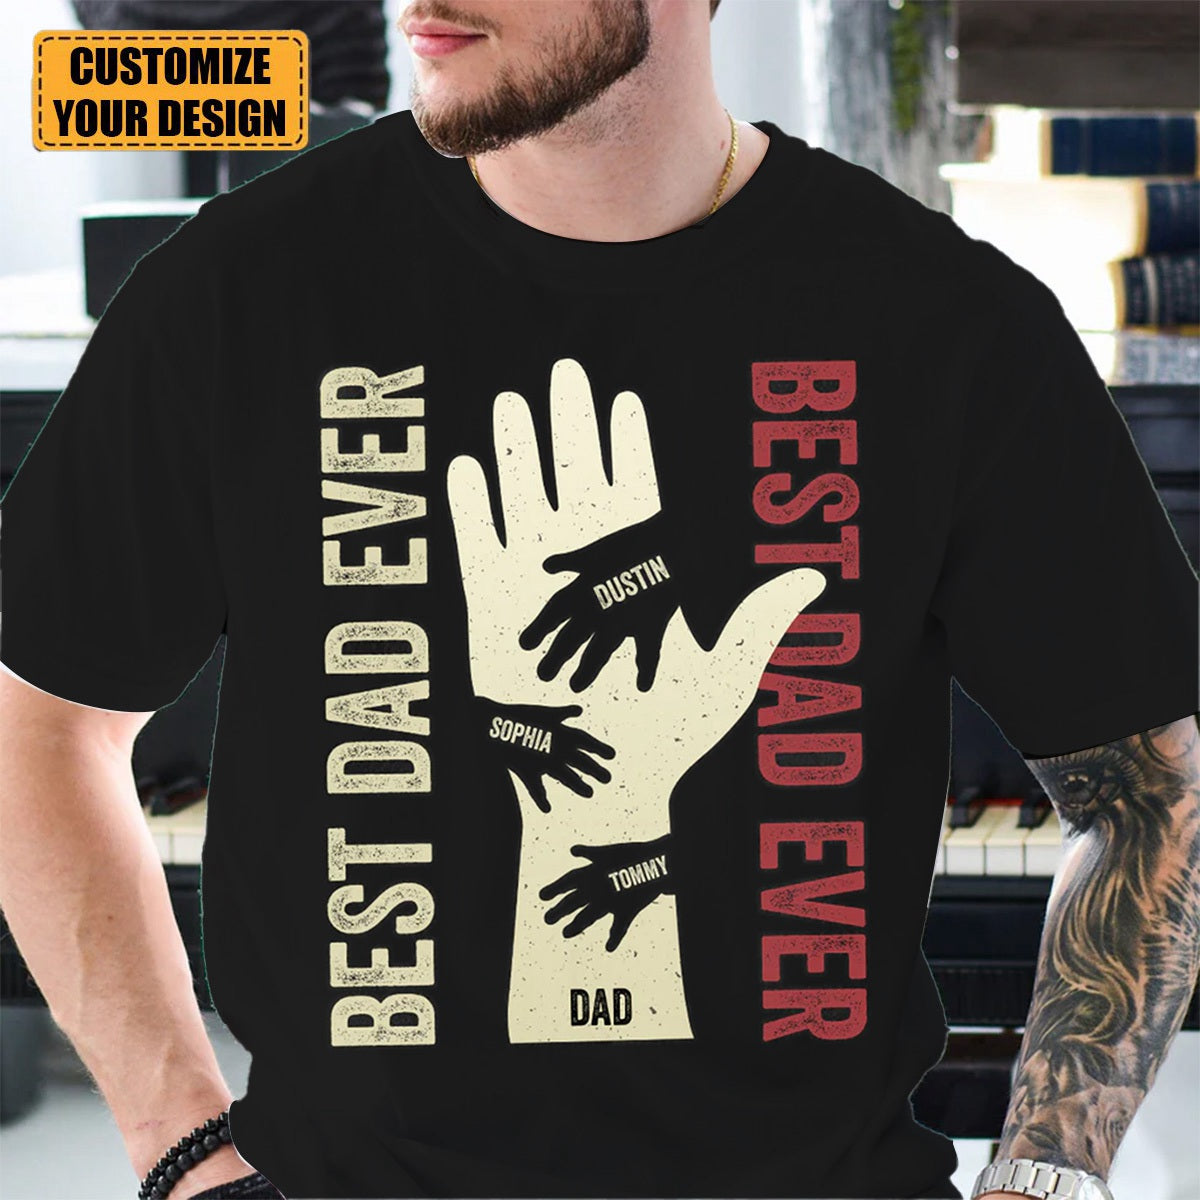 Best Dad Ever - Personalized T-Shirt ,Gift For Dad